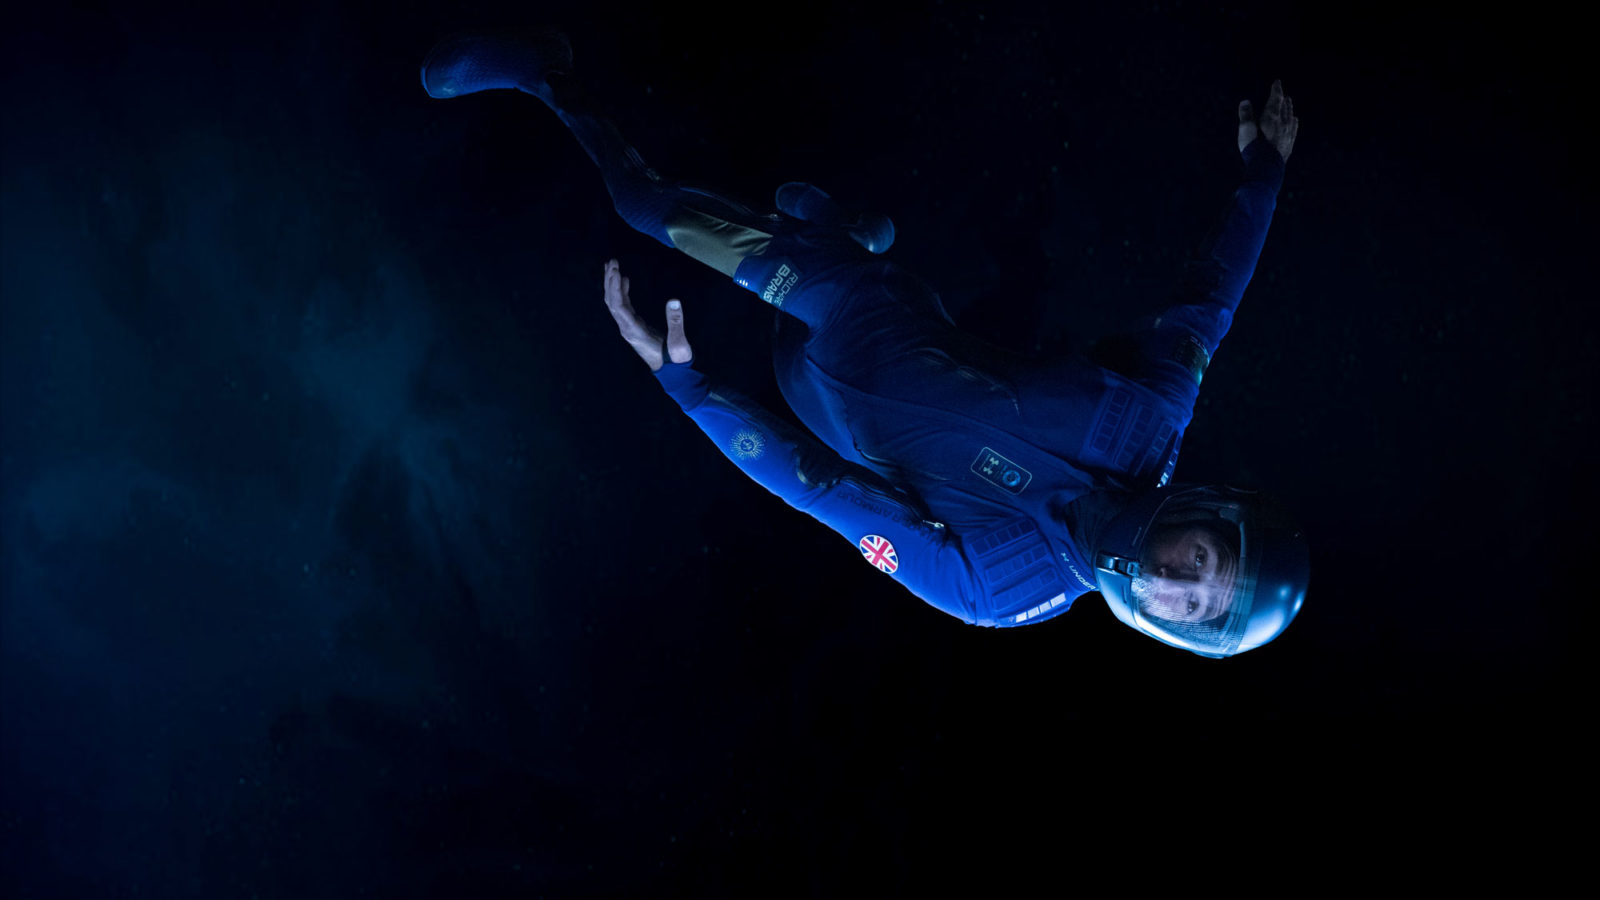 The unveil event in New York showcased the spacewear system on a zero gravity. � Virgin Galactic 